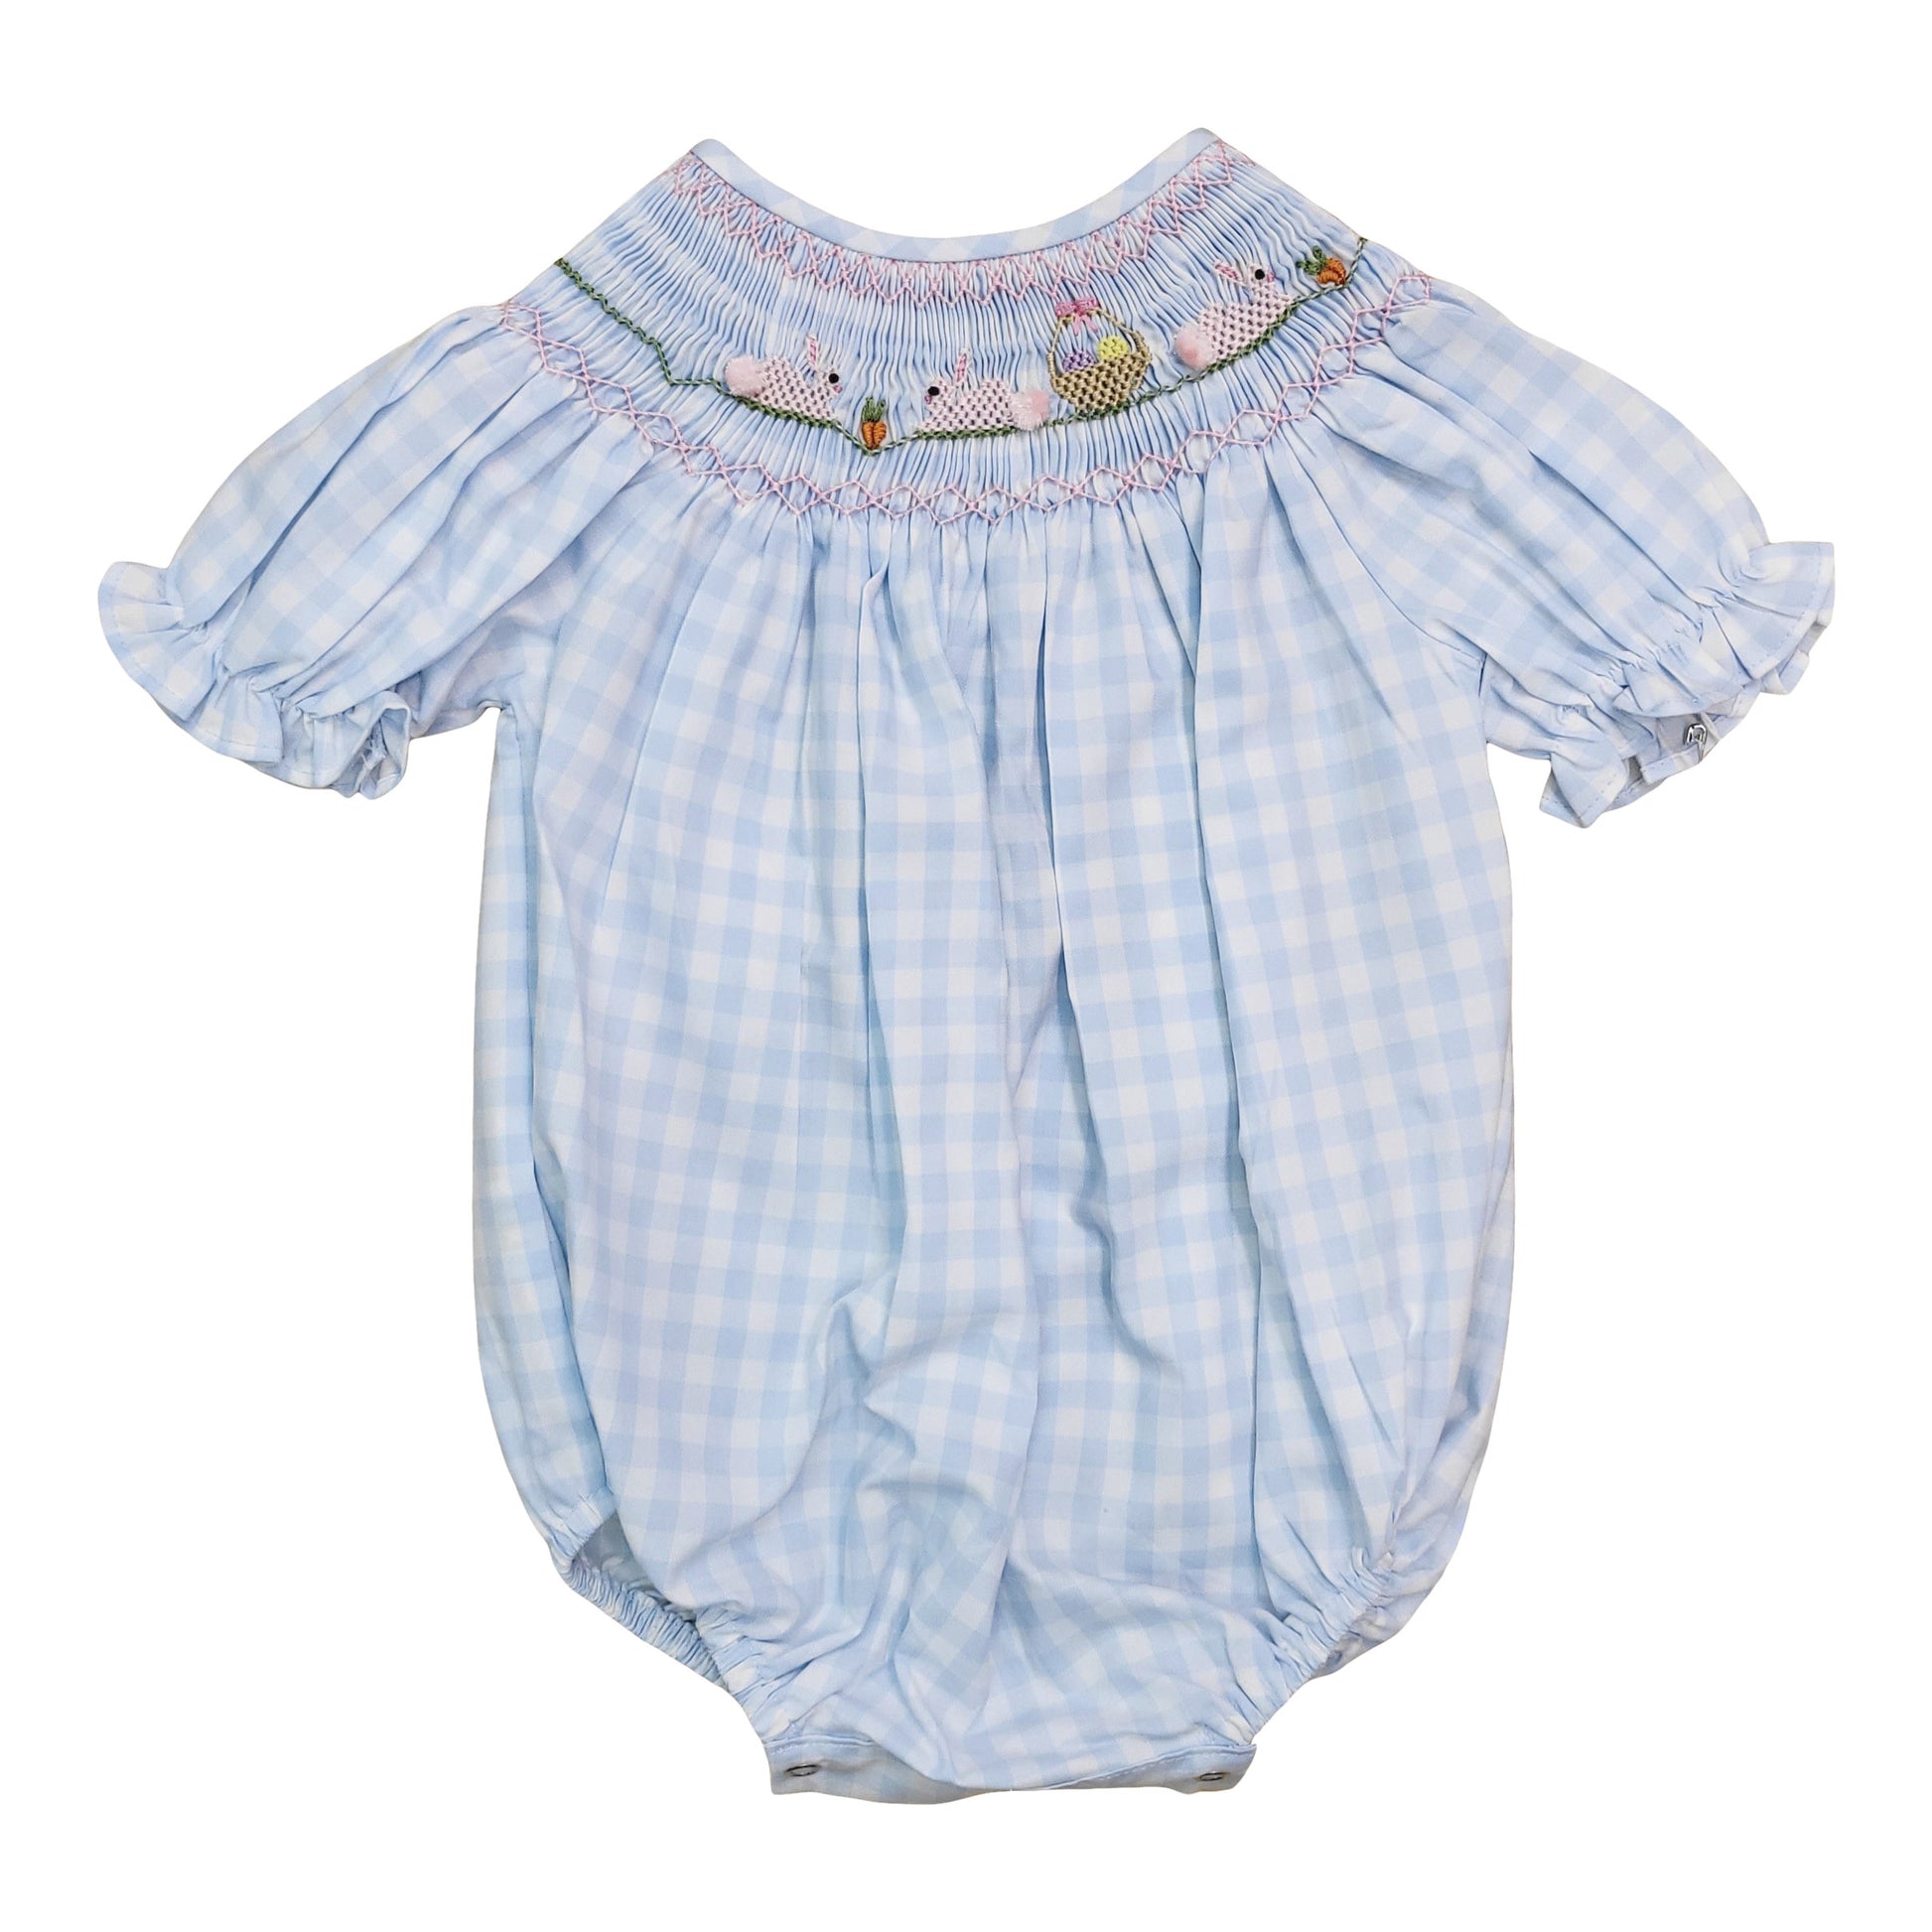 Smocked bishop girls bubble with a blue gingham print and smocked Easter bunny detail.